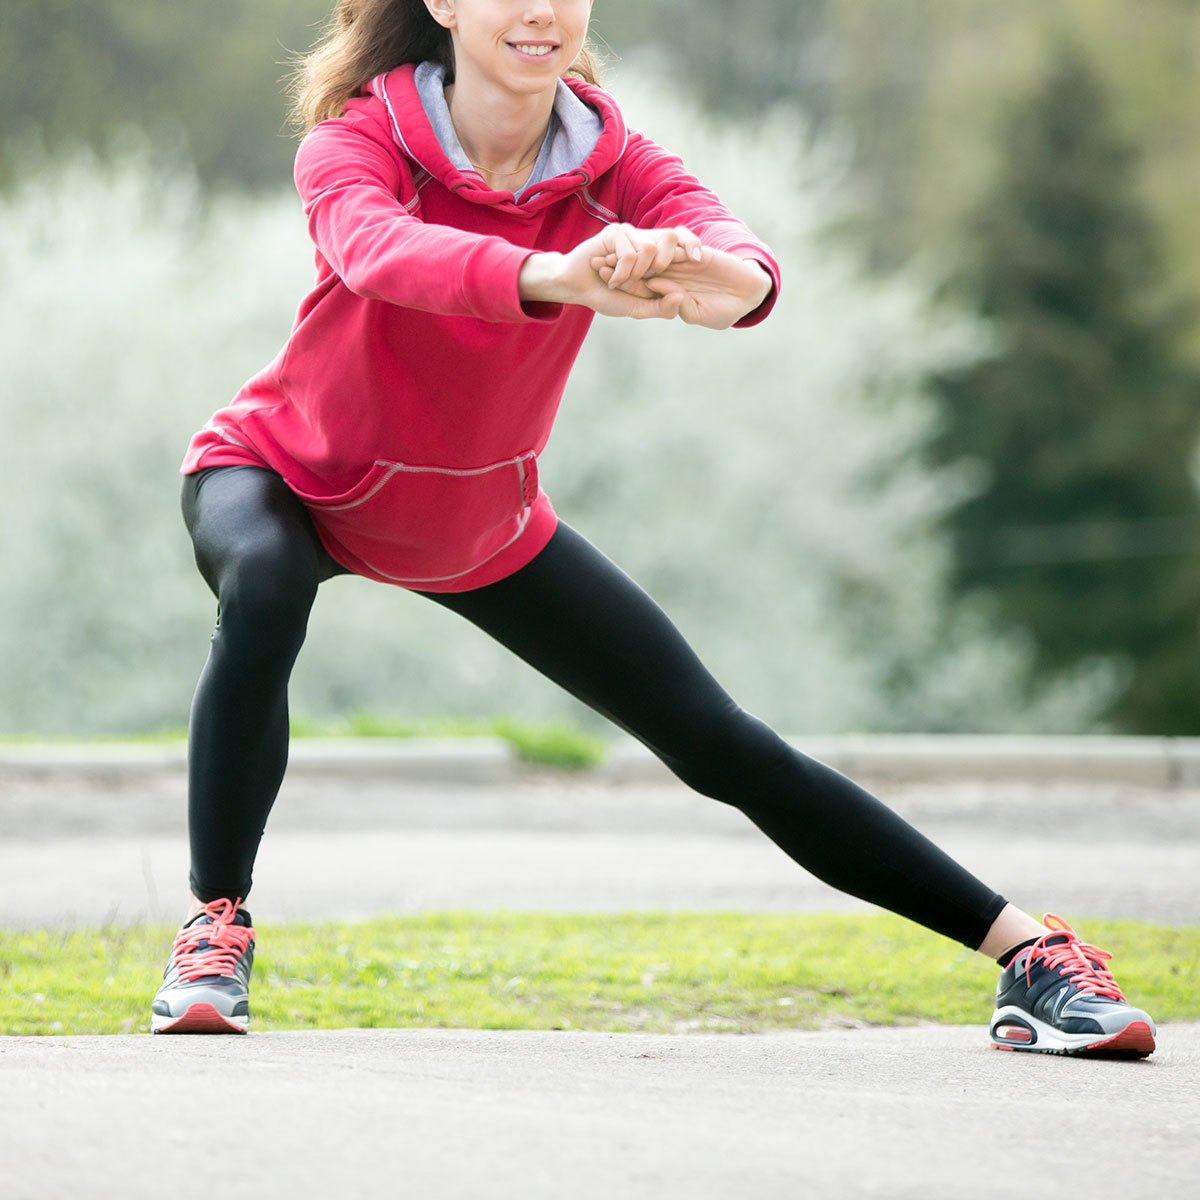 3 Quick Morning Exercises To Tone Muscles And Blast Fat Over 50 - SHEfinds